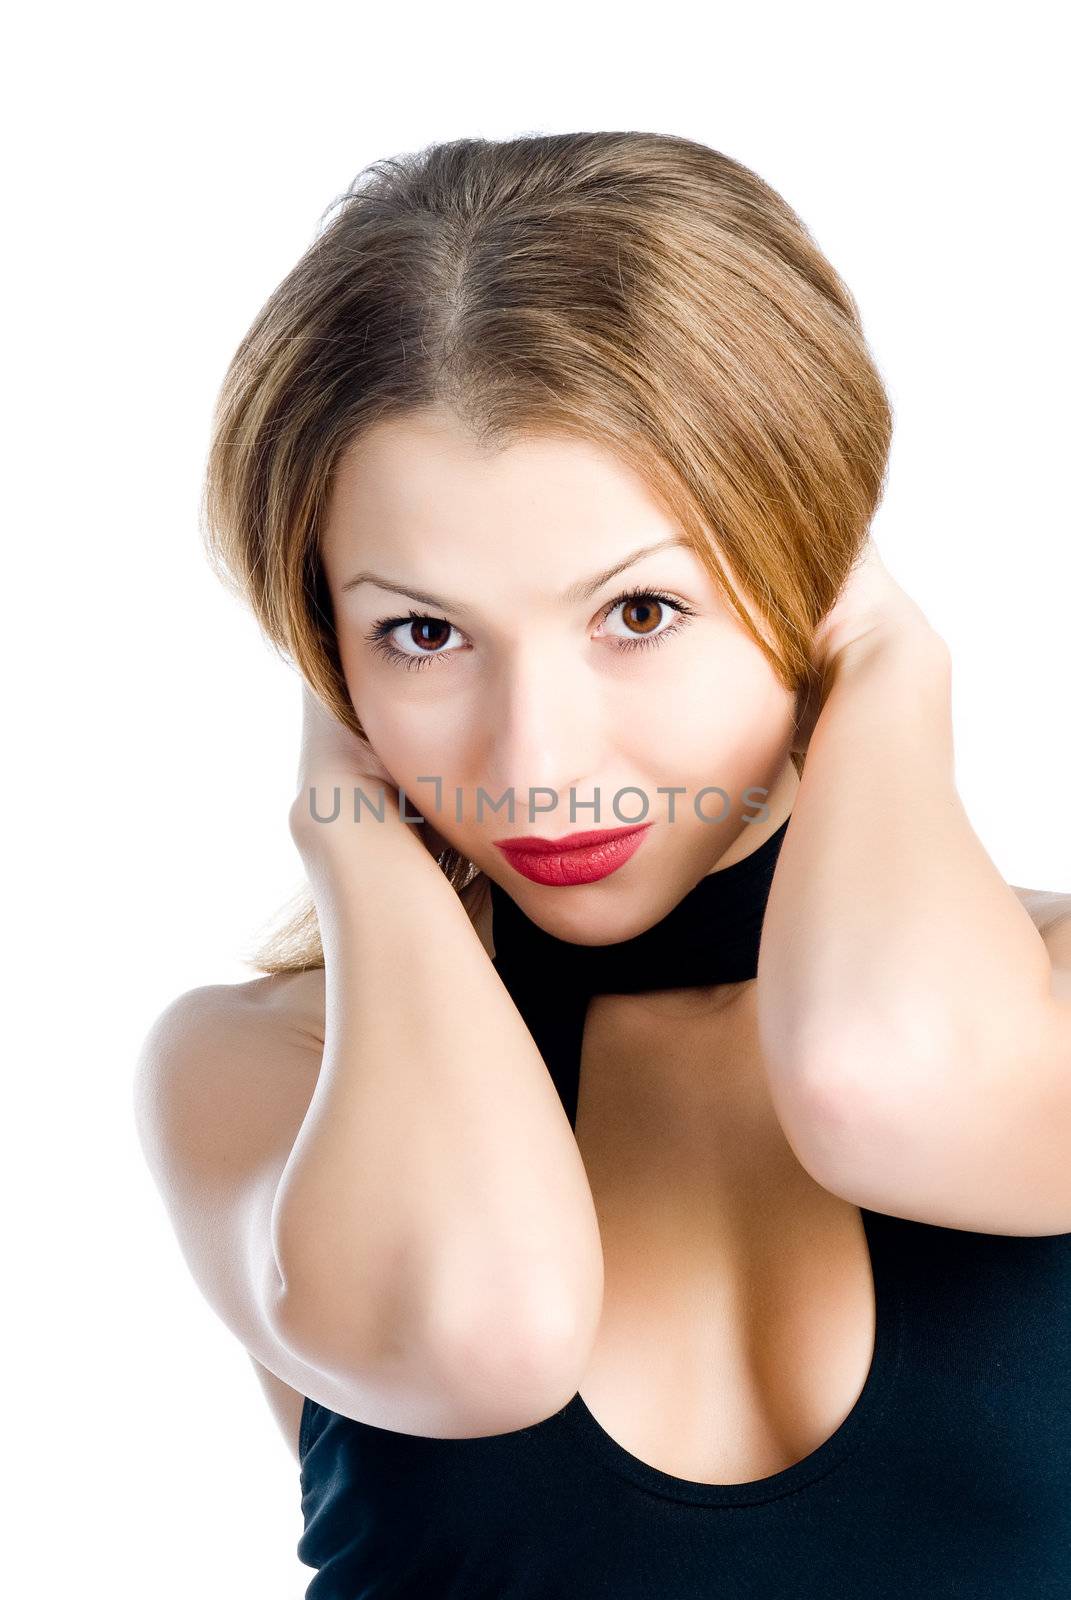 Business woman posing on a white background.